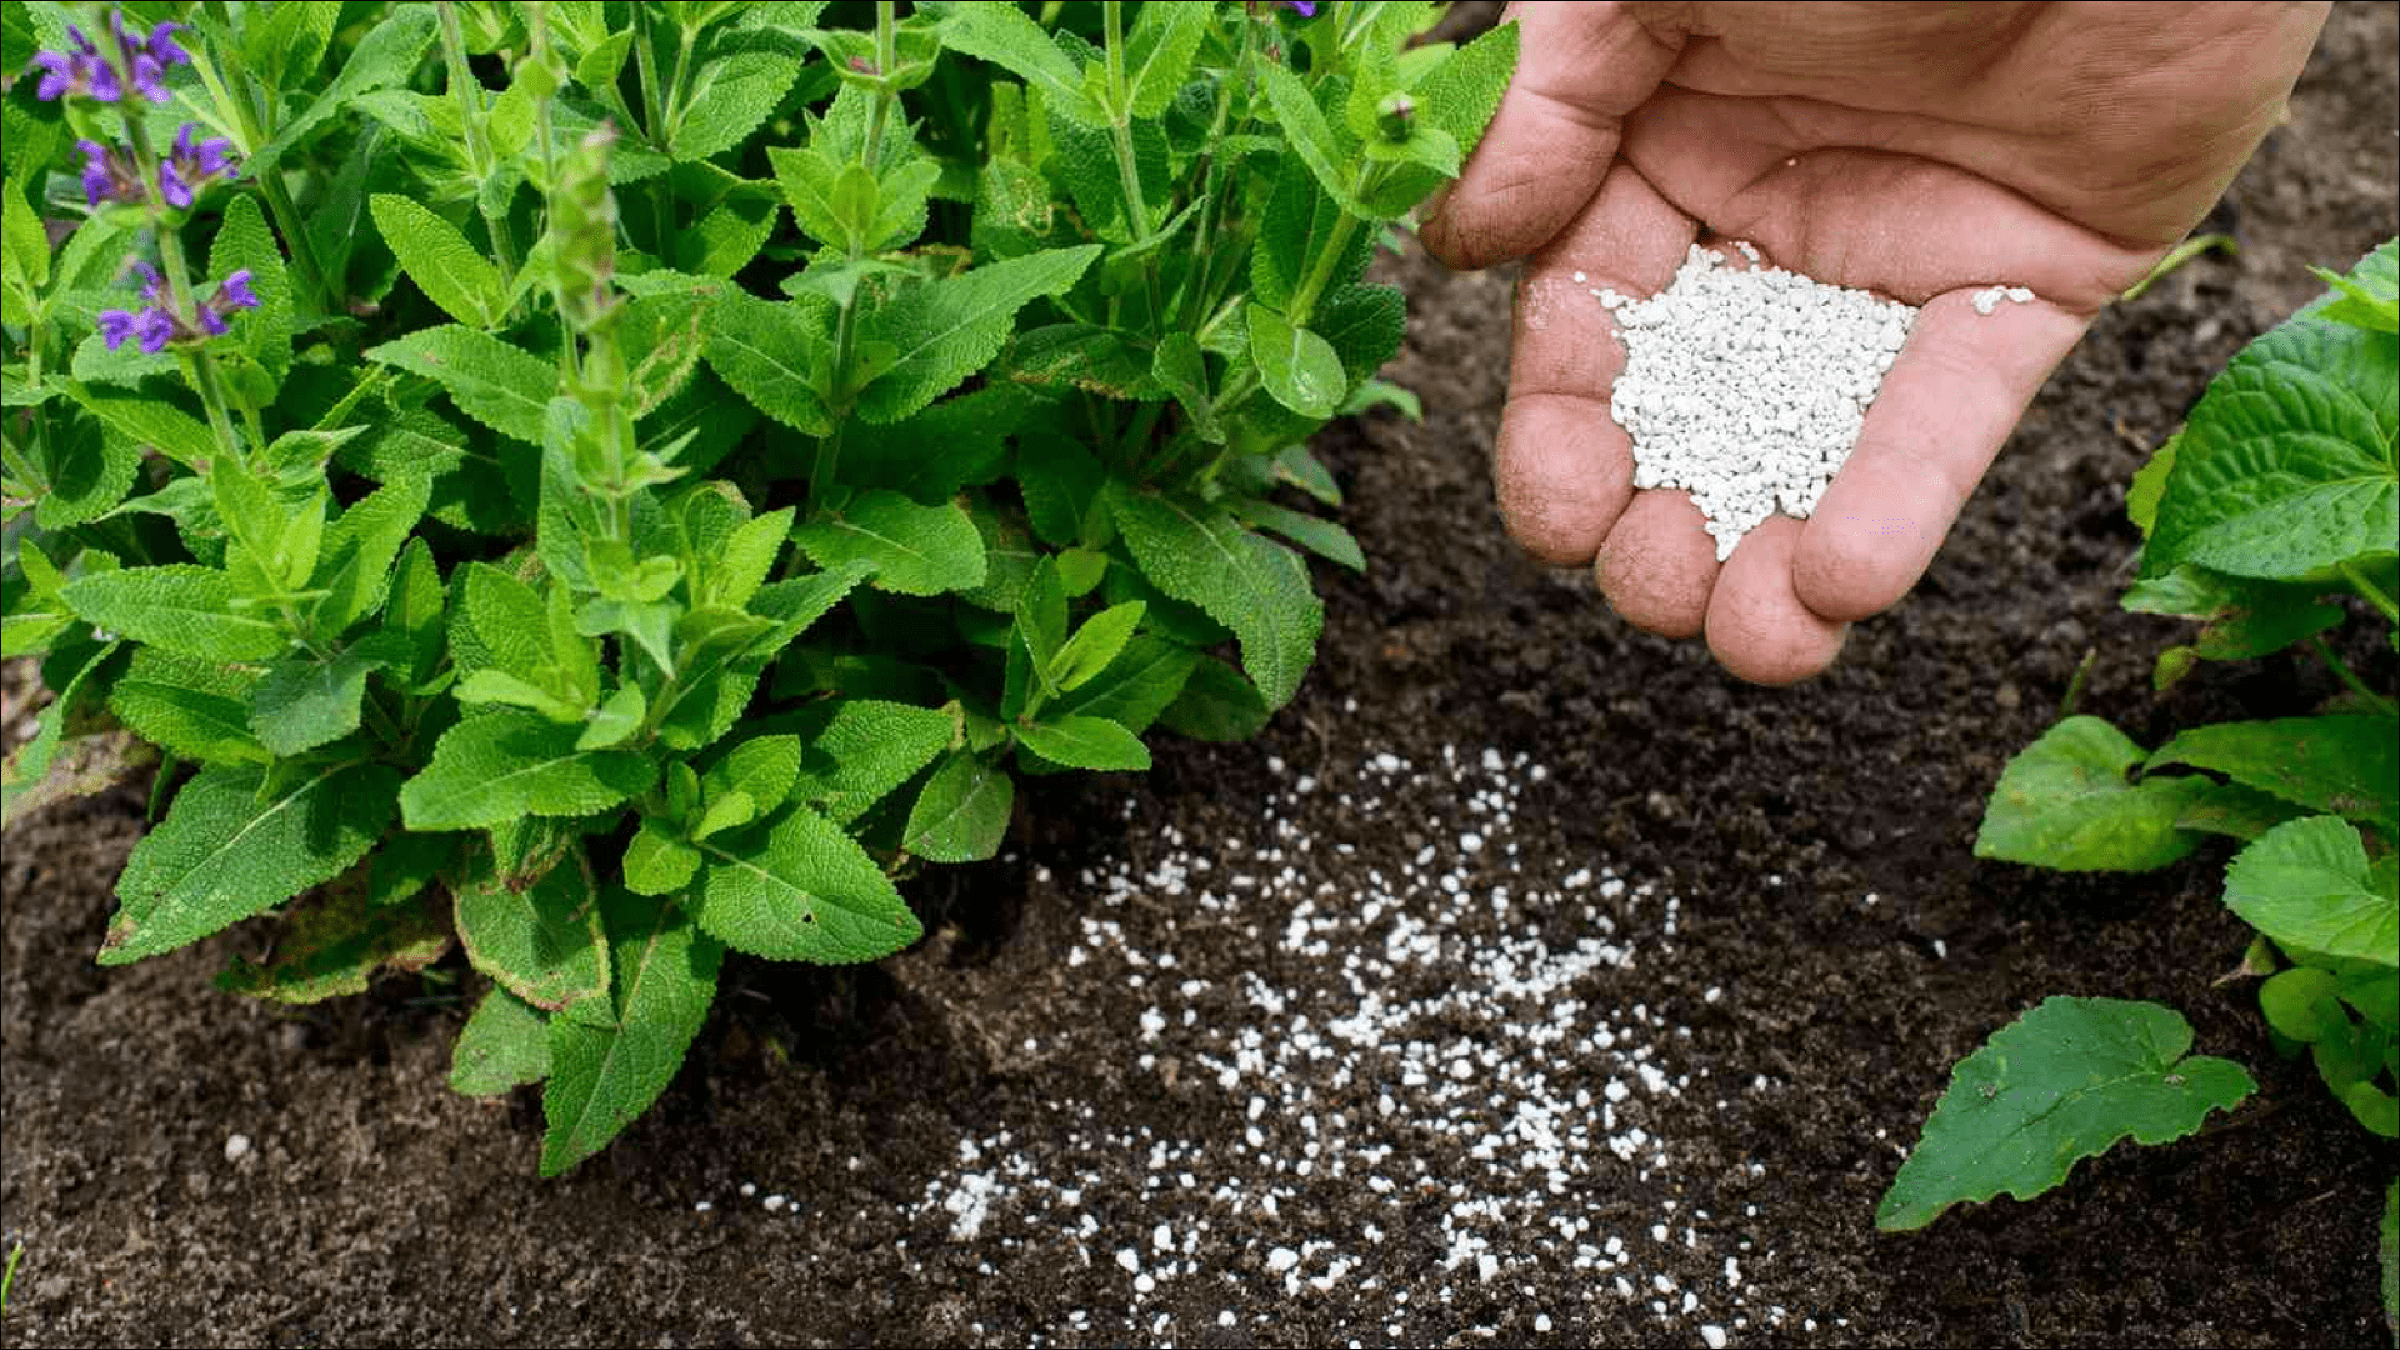 Emissions from fertilizers could be slashed by 2050 study